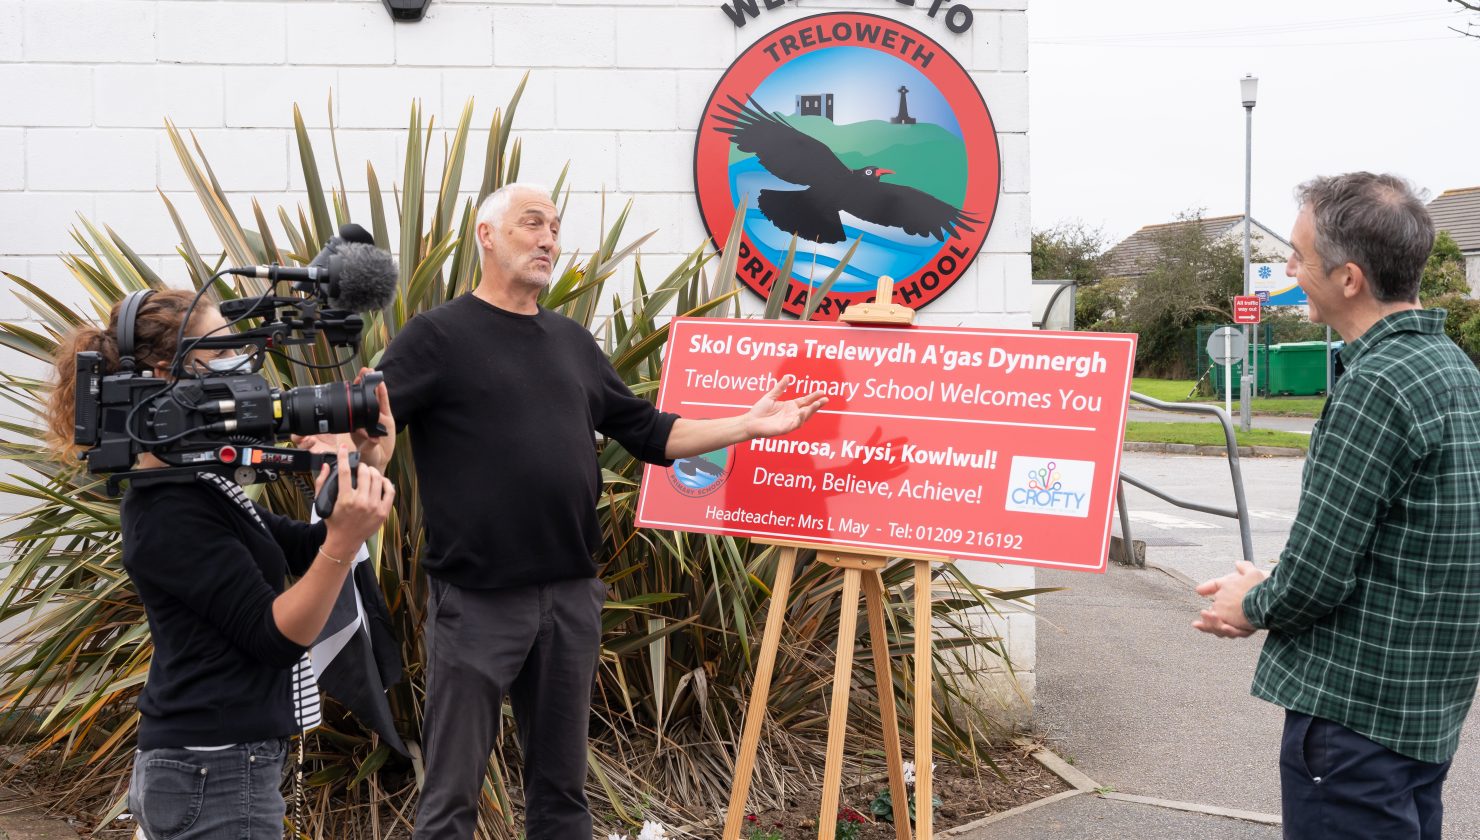 A Man stands in front of a Bilingual Cornish & English School Sign while being interviewed, a television camera is being held up to his side